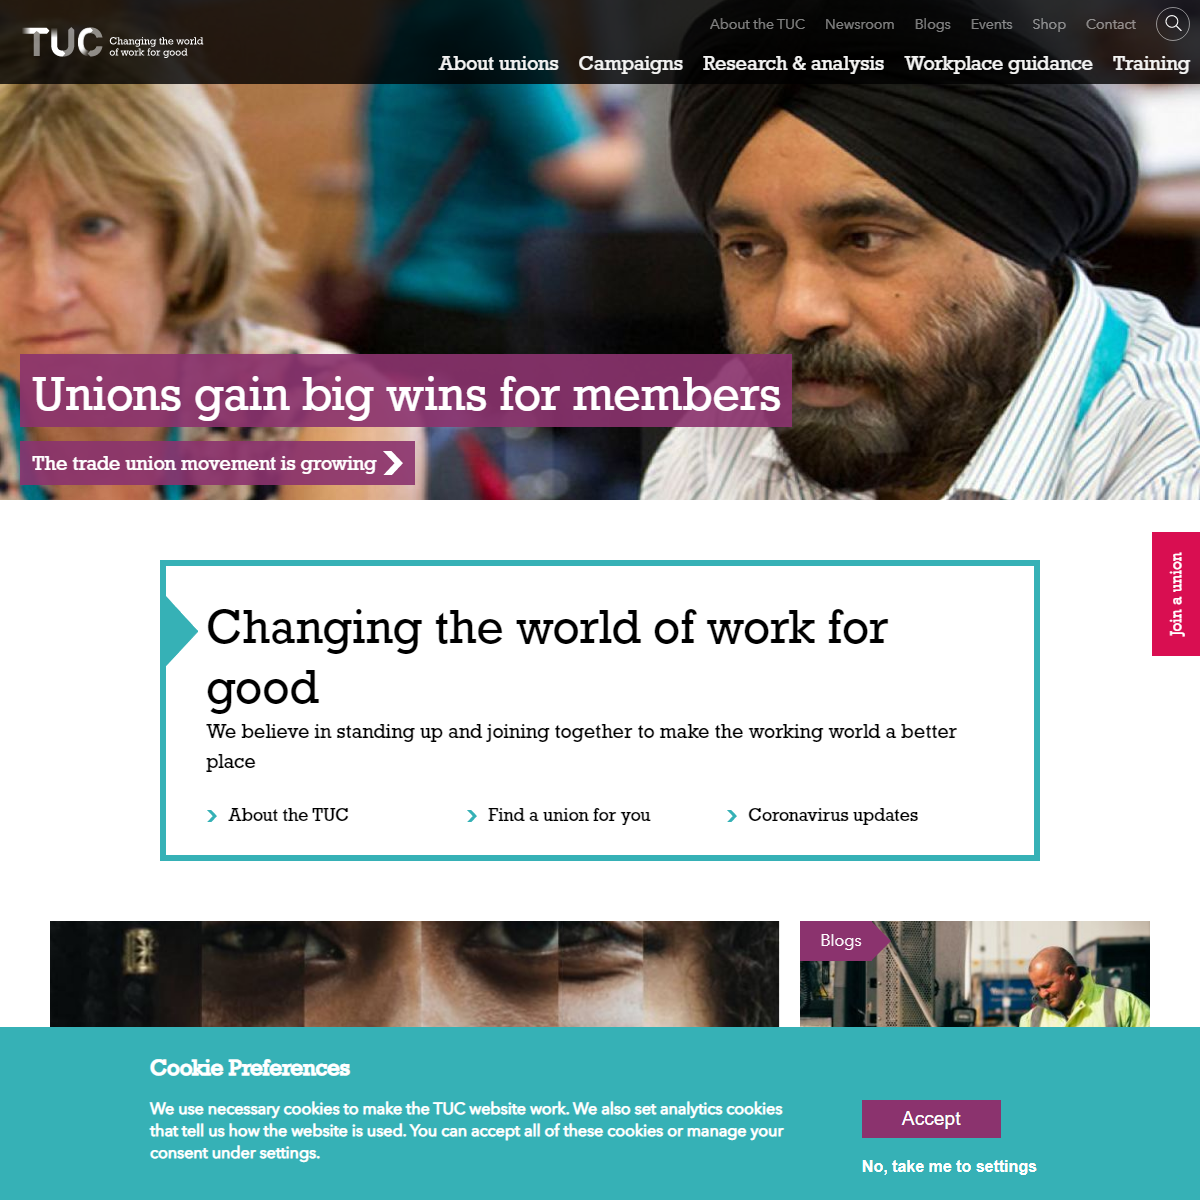 A complete backup of https://www.tuc.org.uk/